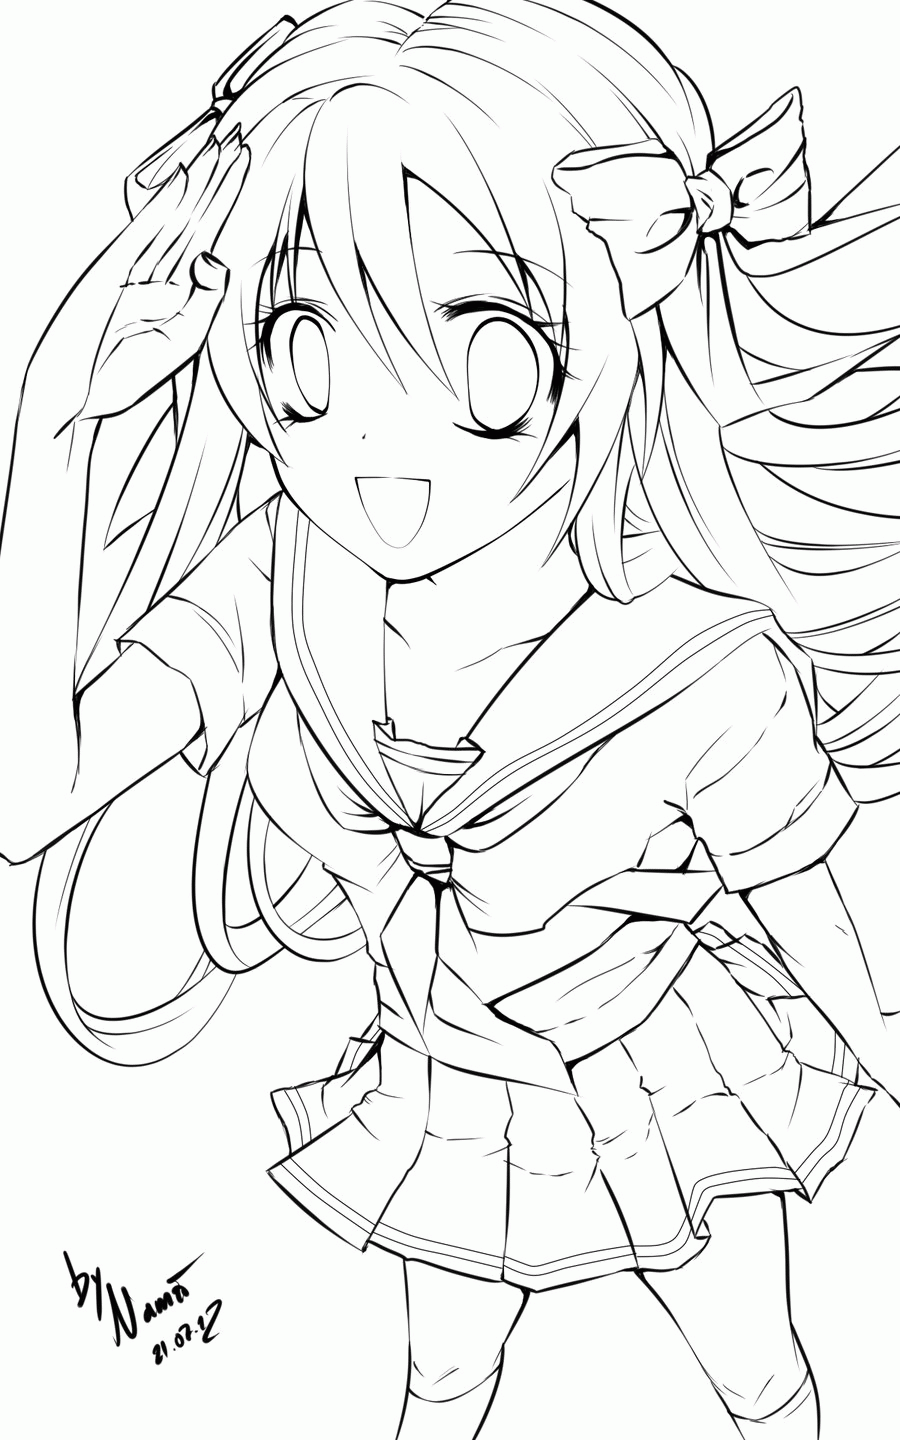 Free Girl Witch On Anime Coloring Pages - VoteForVerde.com